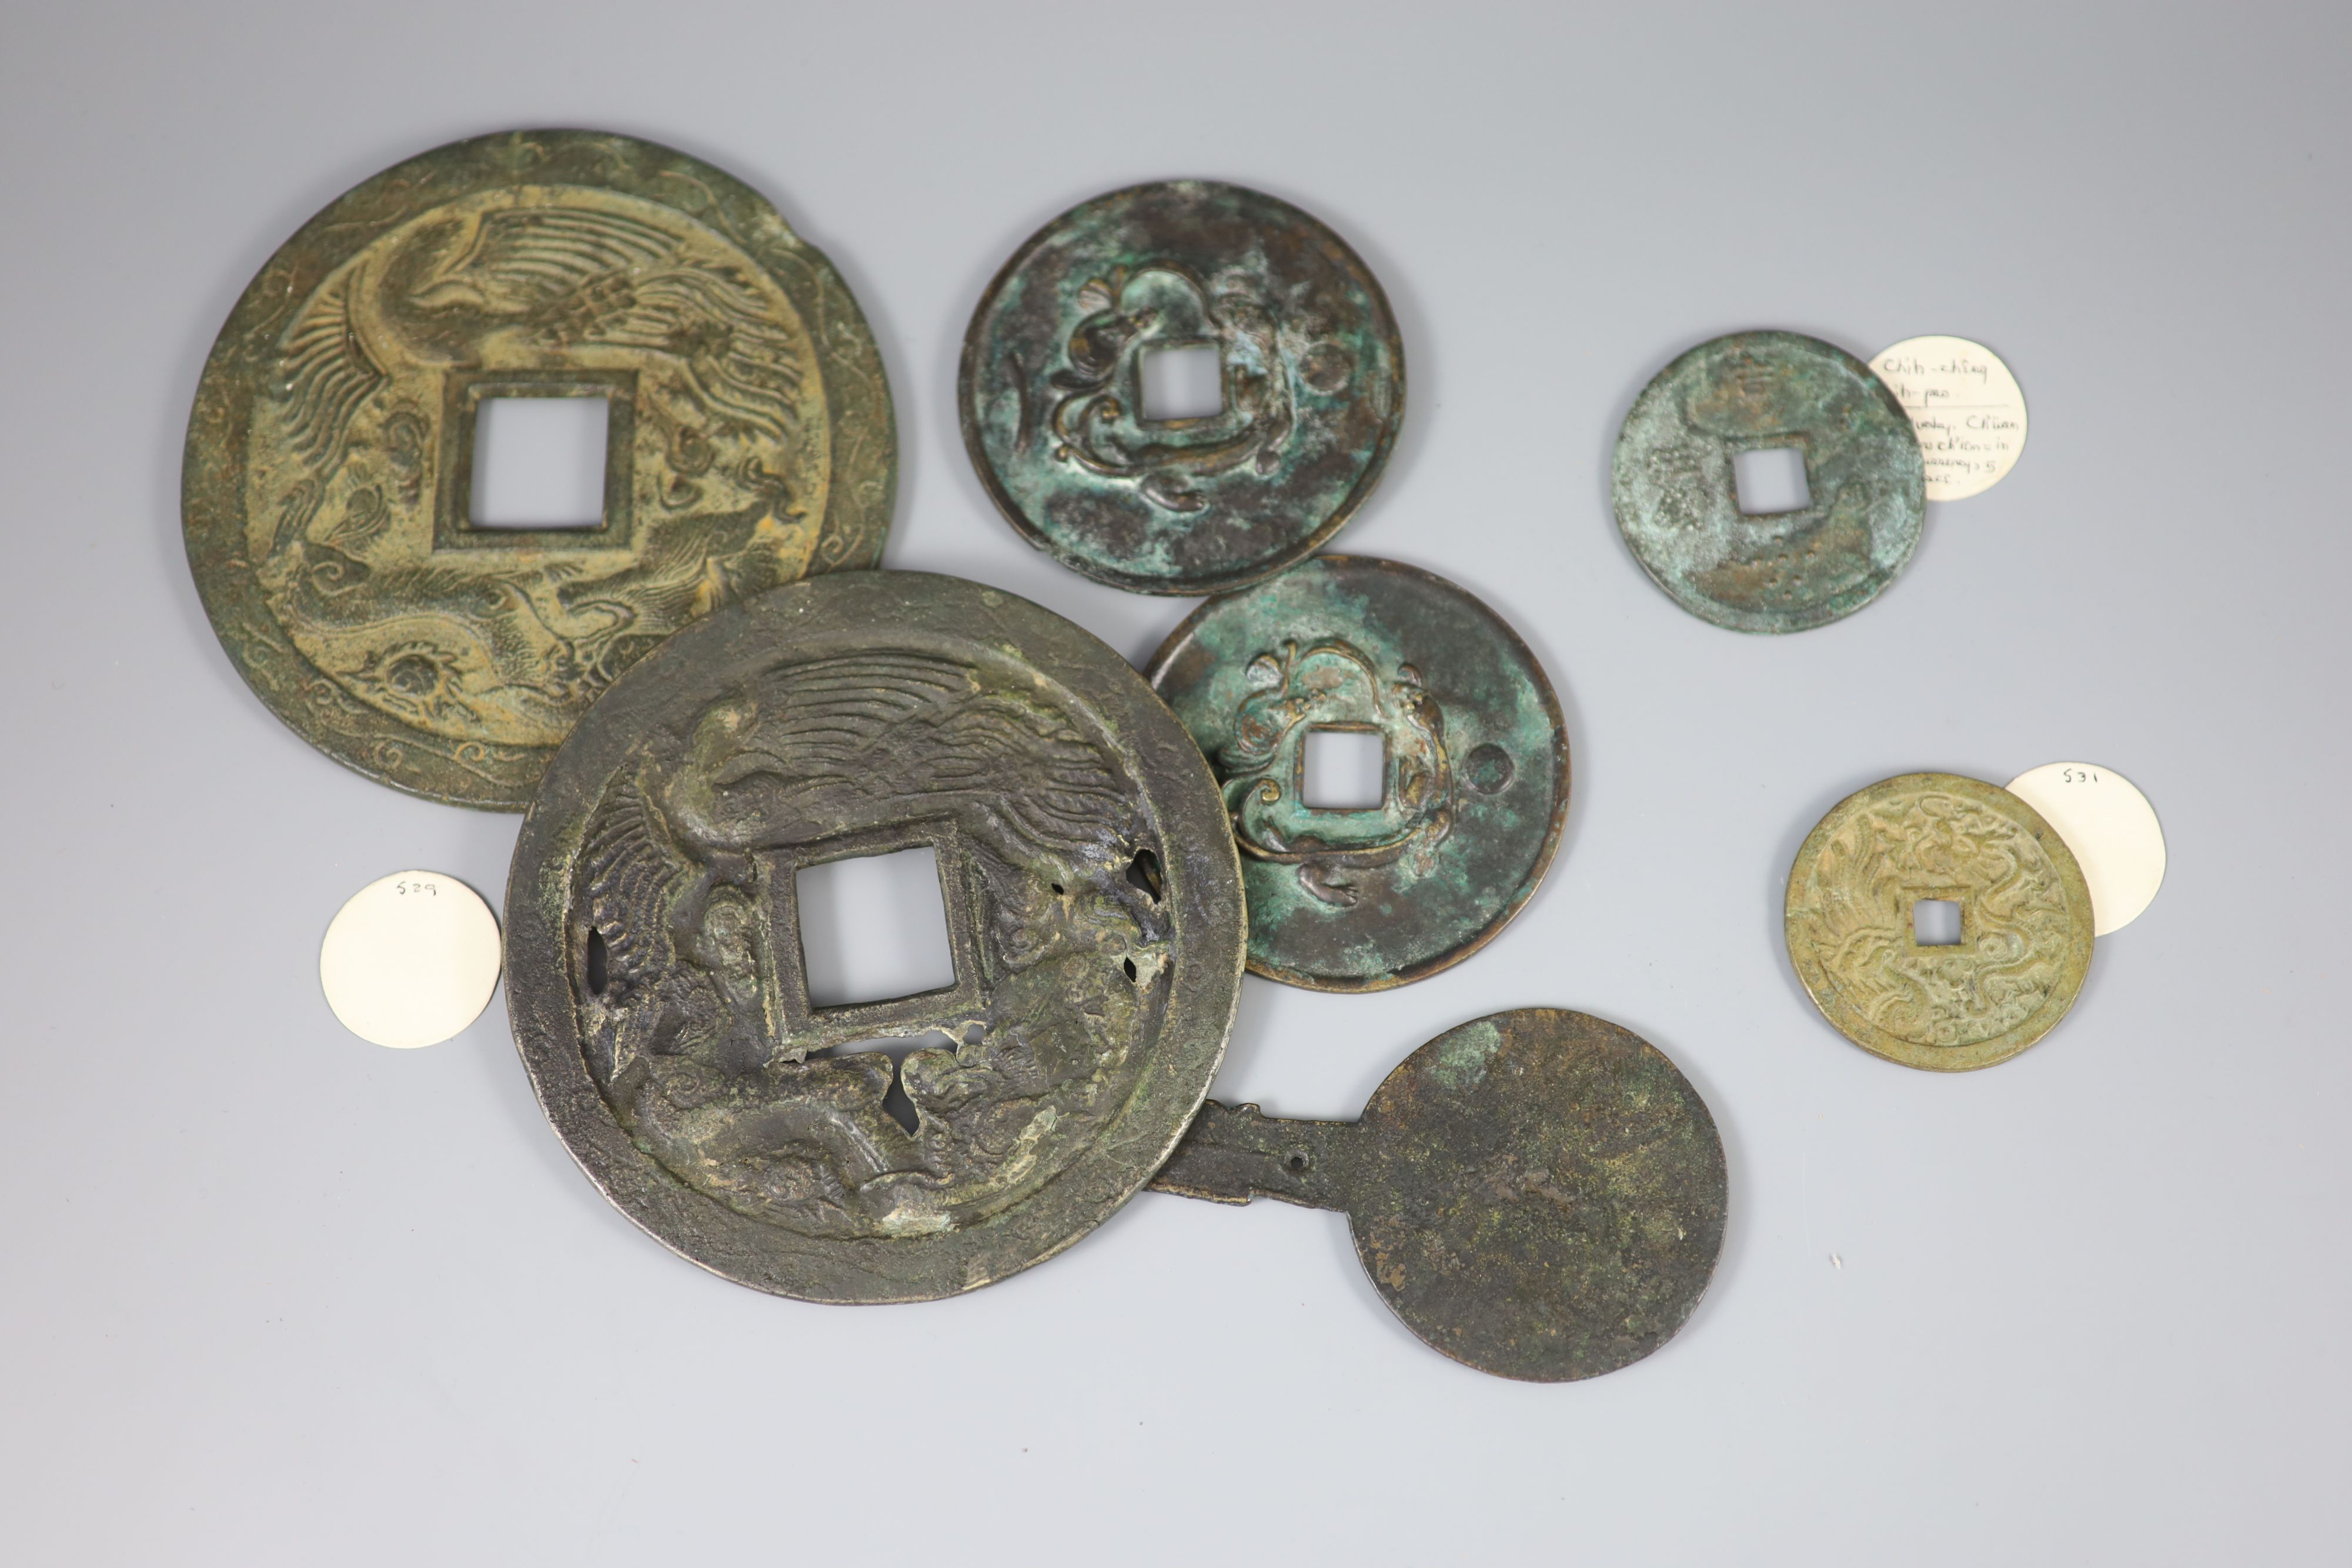 A group of 7 Chinese bronze coin charms or amulets, Qing dynasty- Republic period,